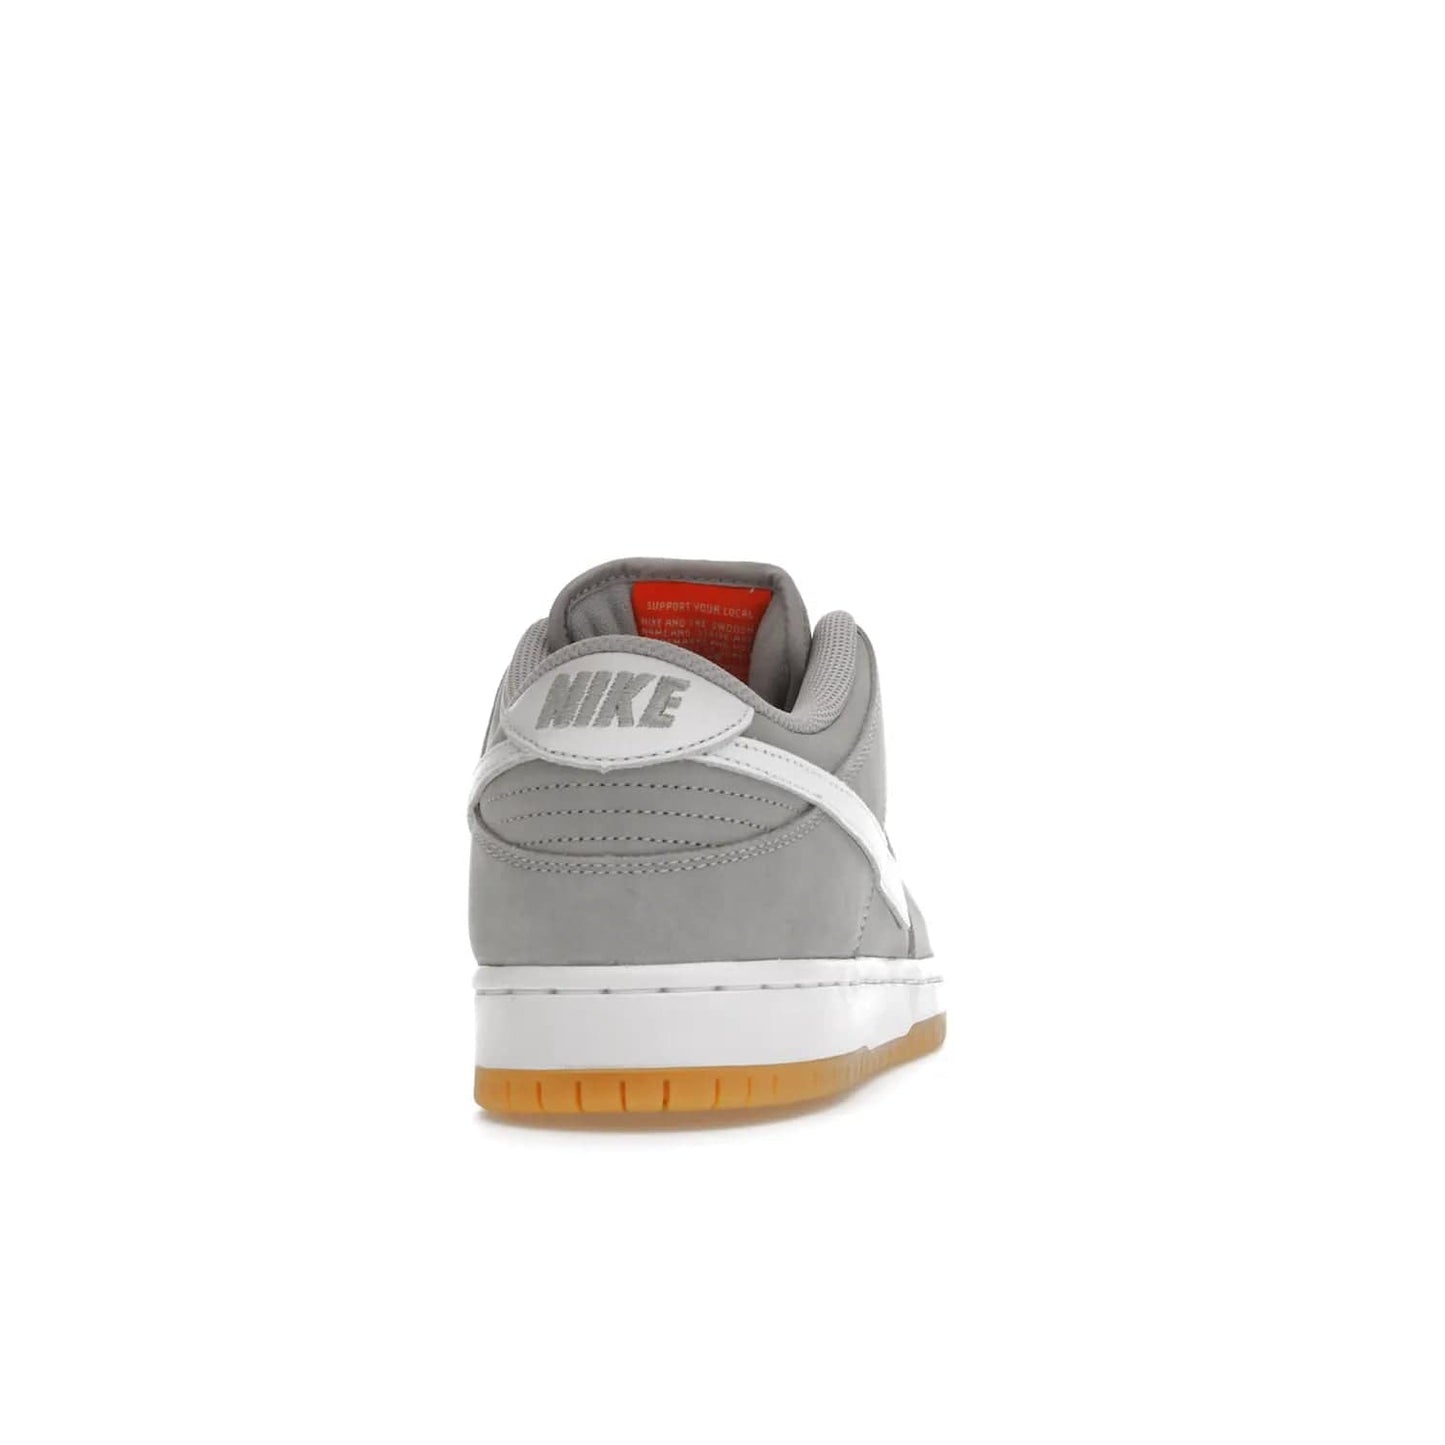 Nike SB Dunk Low Pro ISO Orange Label Wolf Grey Gum - Image 29 - Only at www.BallersClubKickz.com - Introducing Nike's SB Dunk Low Pro ISO Orange Label Wolf Grey Gum - a stylish shoe with a premium Wolf Grey upper, white leather Nike Swoosh, and an eye-catching gum outsole. With special Nike branding and packaging, this shoe adds a unique fashion statement. Out Feb. 24, 2023.